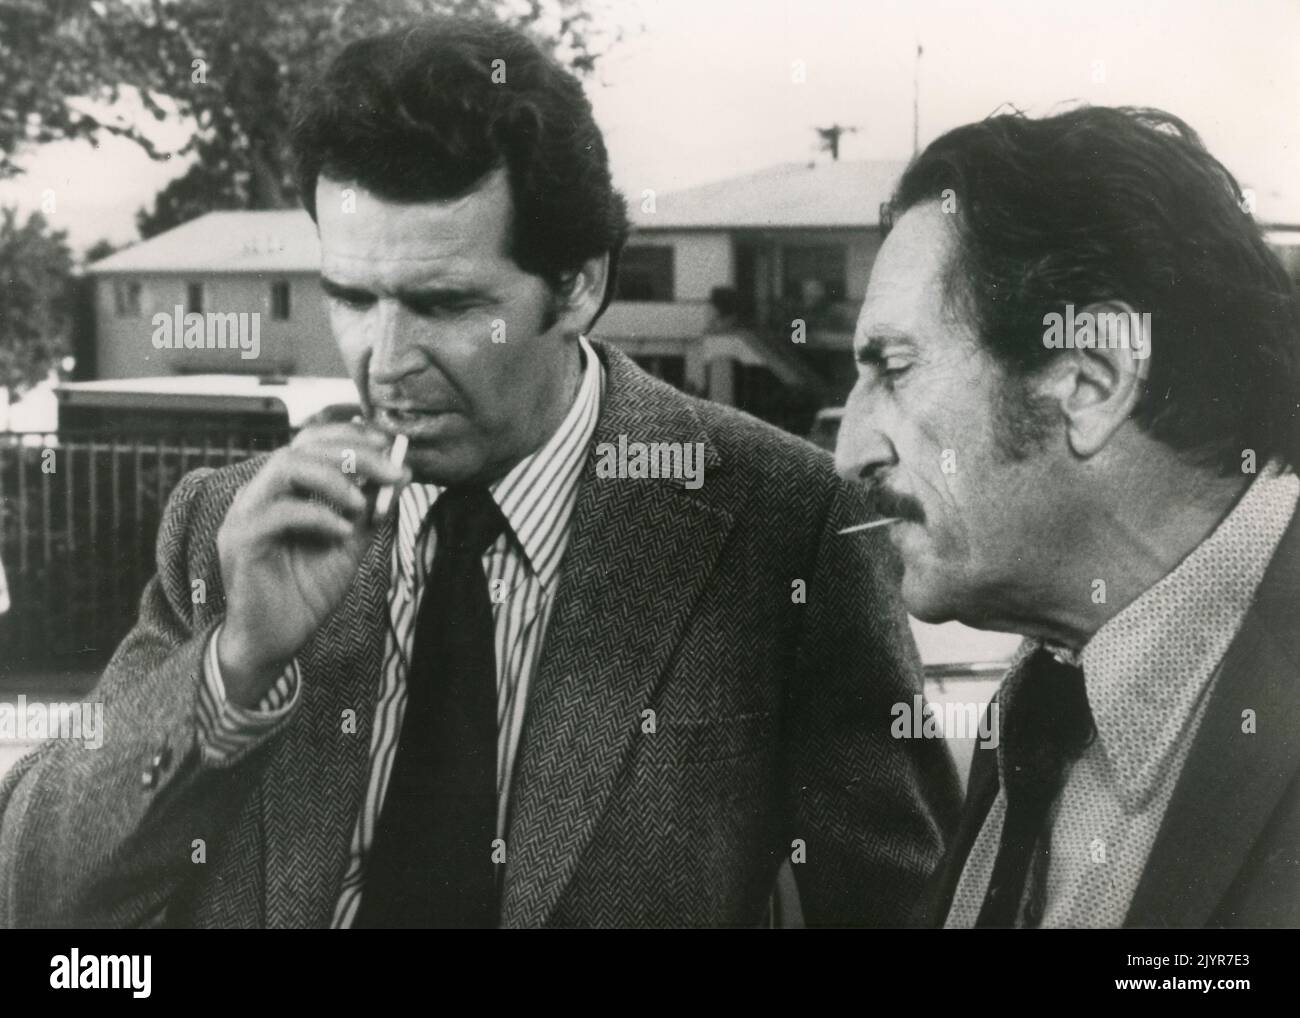 American actors James Garner and Lou Krugman in the drama series The Rockford Files, USA 1974 Stock Photo